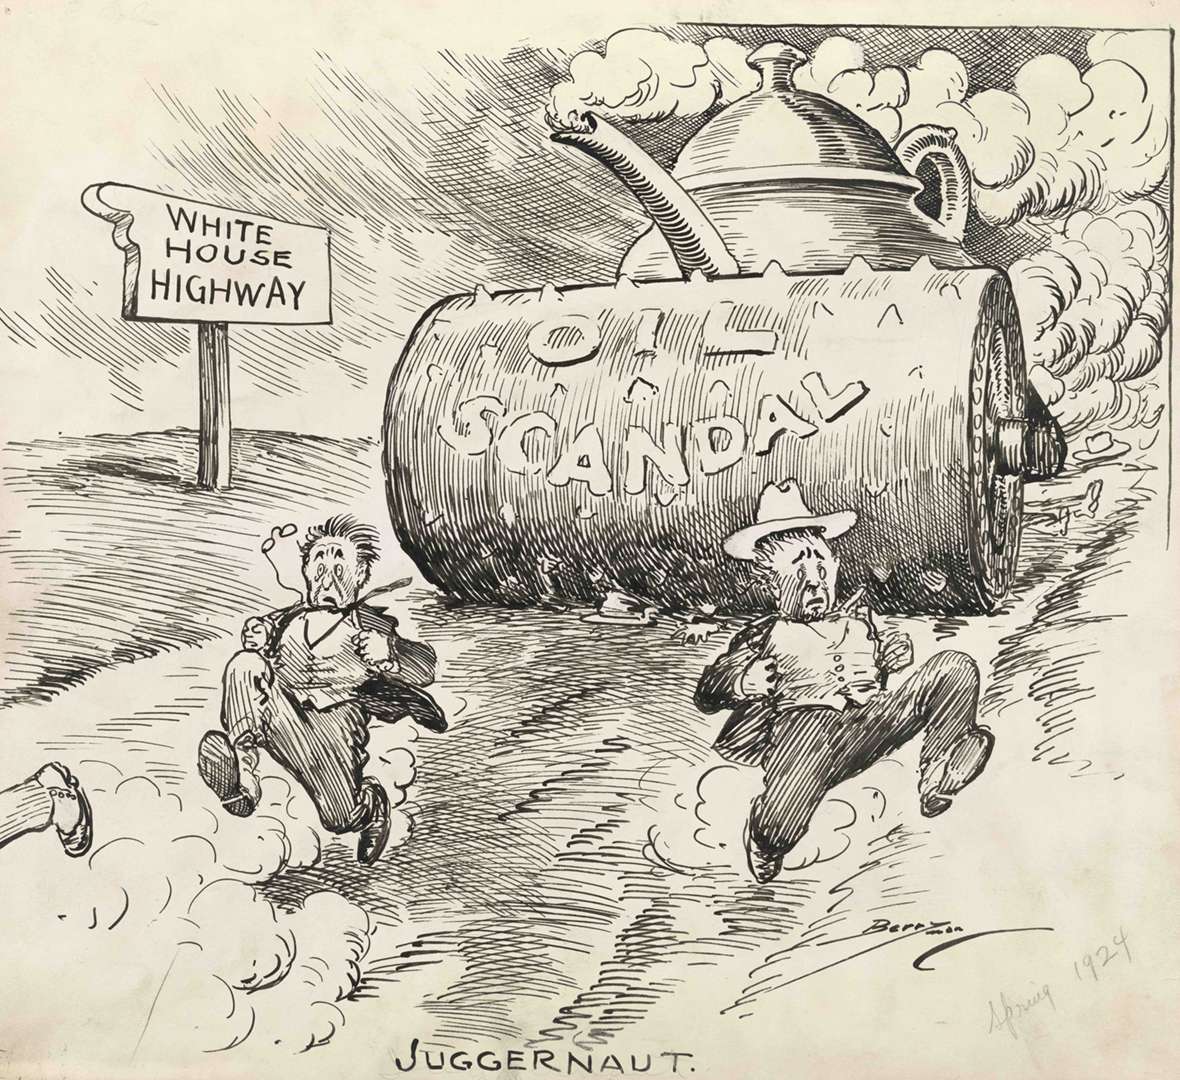 Digital Toolkit: The Teapot Dome Scandal | The Online Encyclopedia of